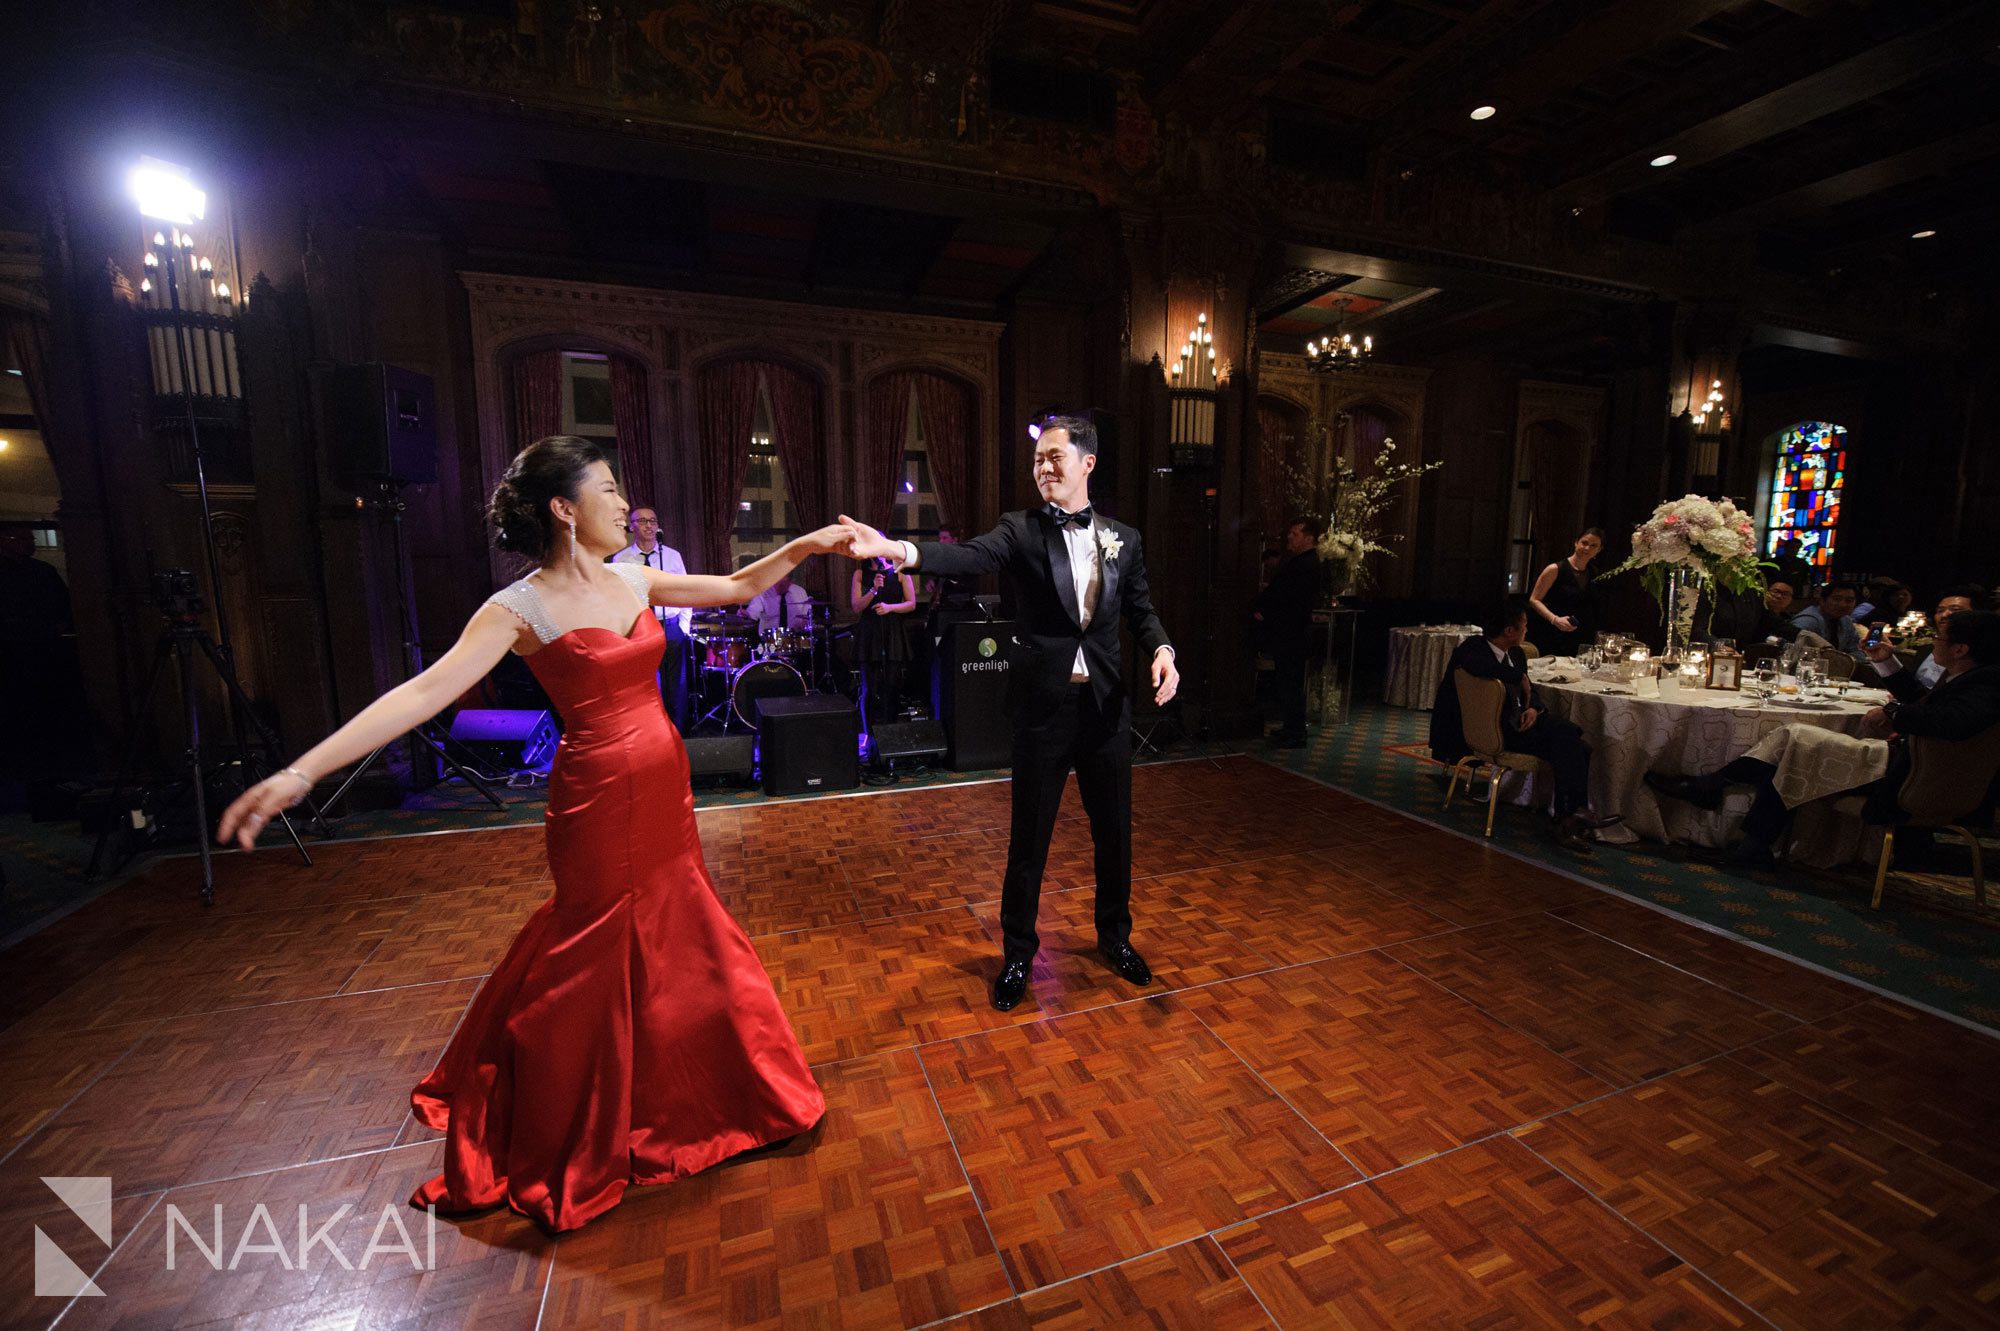 intercontinental magnificent mile wedding photo first dance chicago hall of lions reception